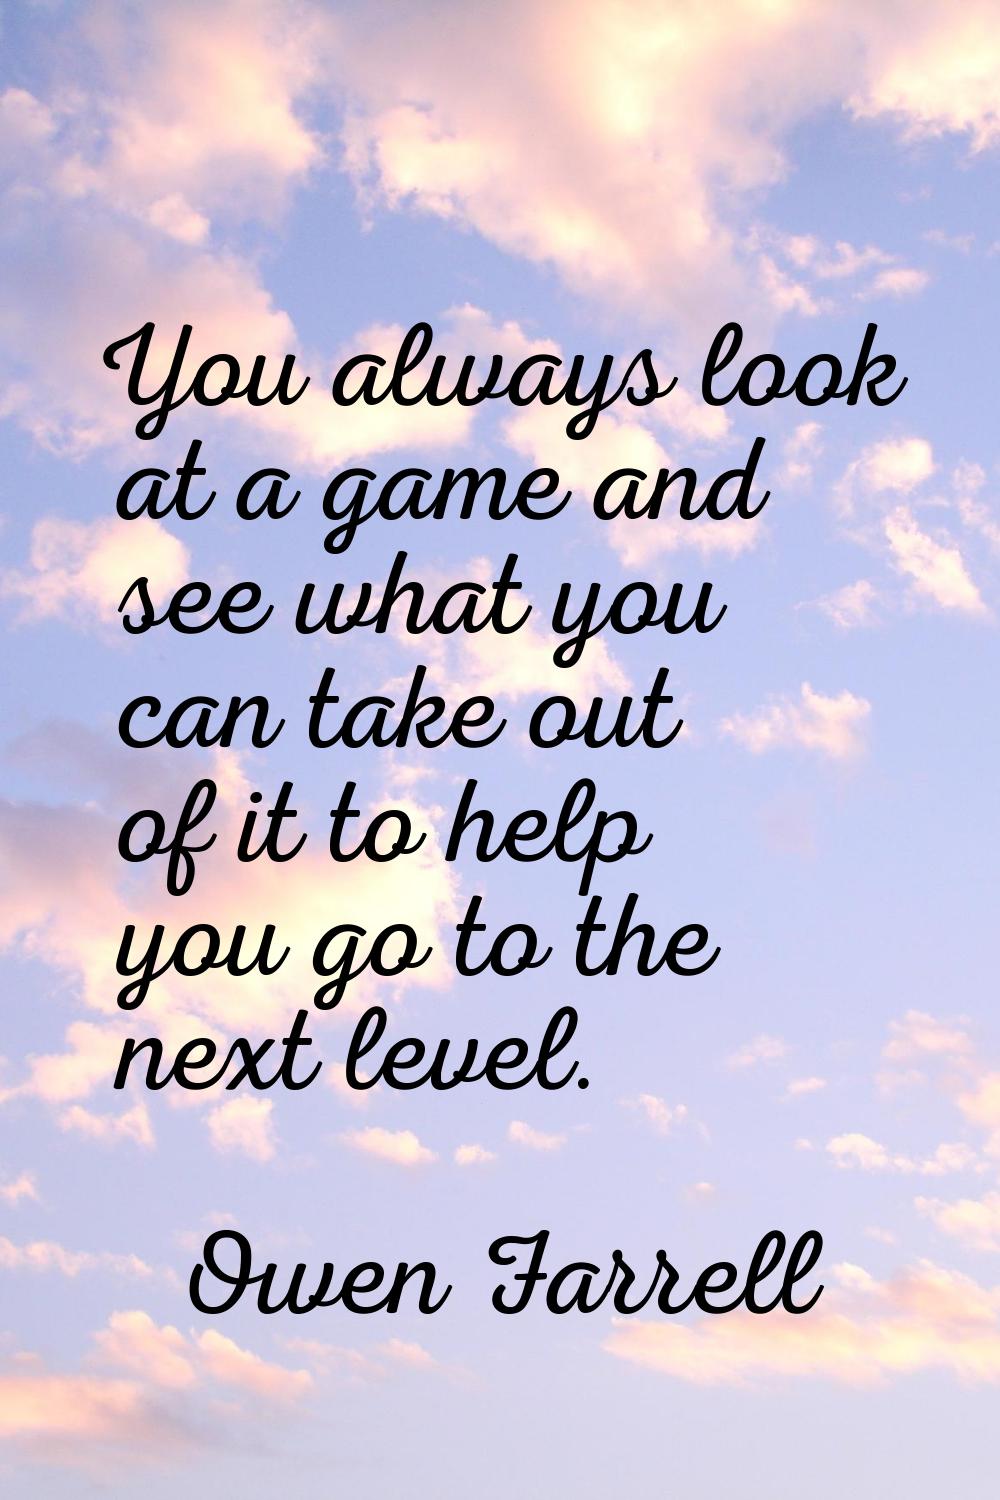 You always look at a game and see what you can take out of it to help you go to the next level.